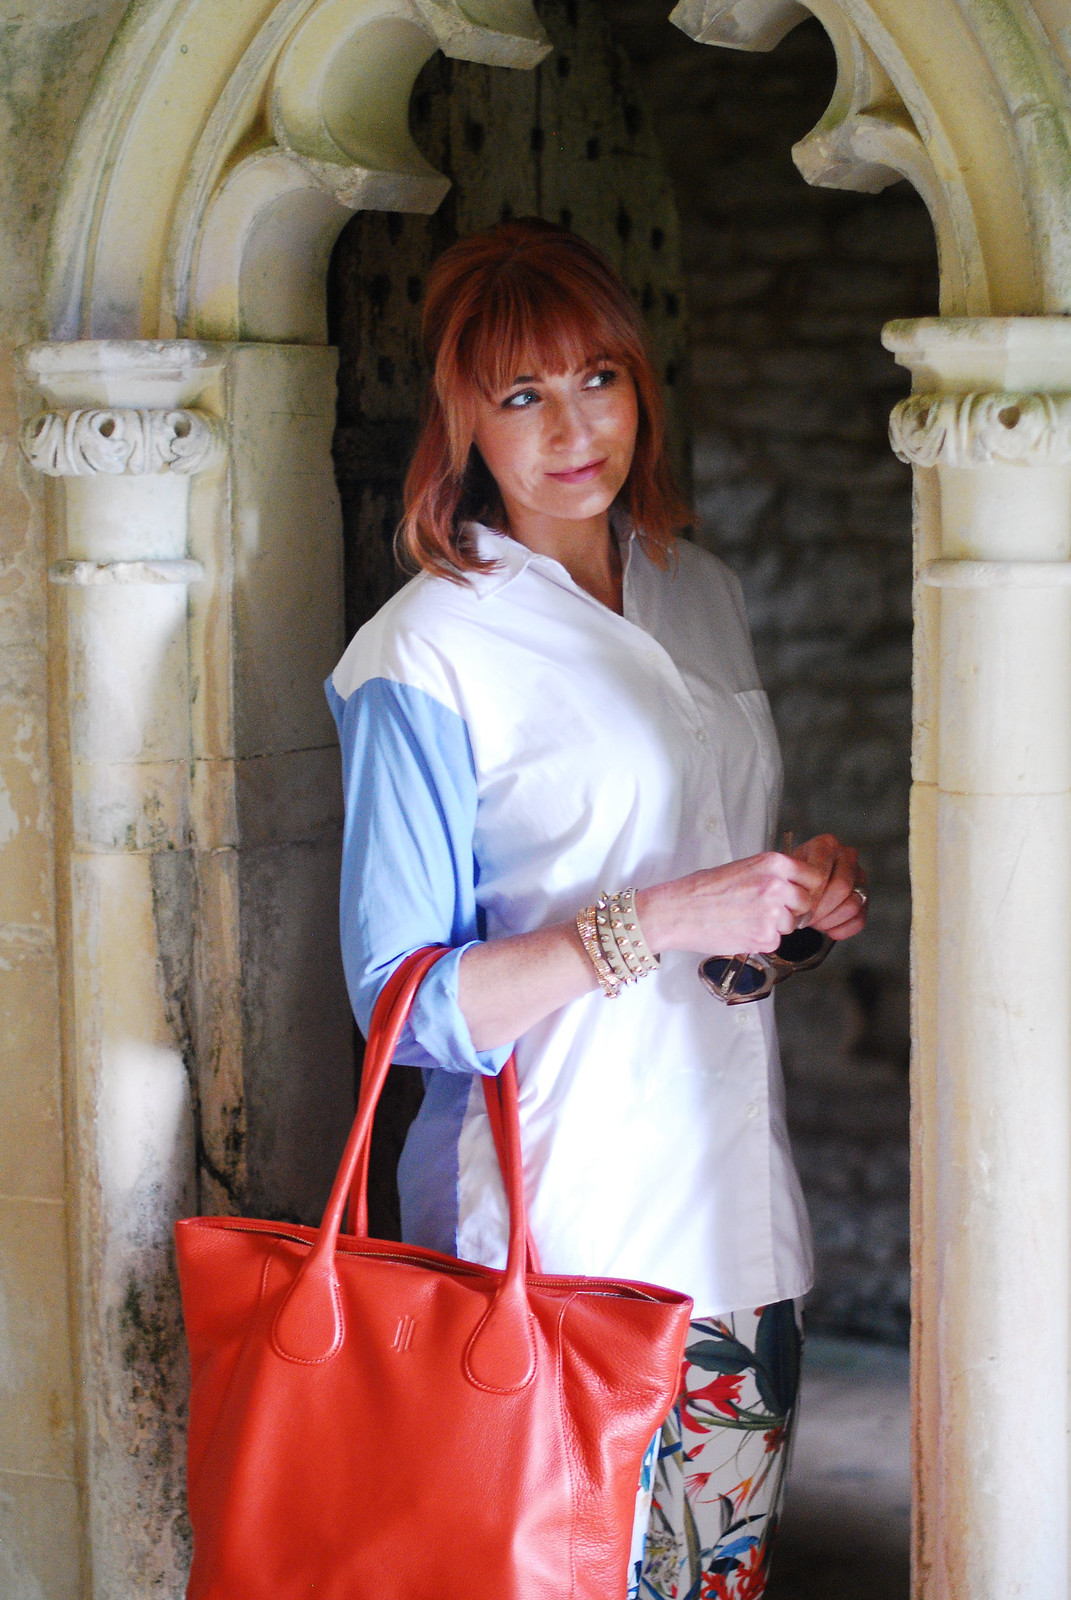 Summer style: Two-tone button up shirt, tropical print pants, orange tote, embellished sneakers (Painswick Rococo Garden, the Cotswolds) | Not Dressed As Lamb, over 40 style